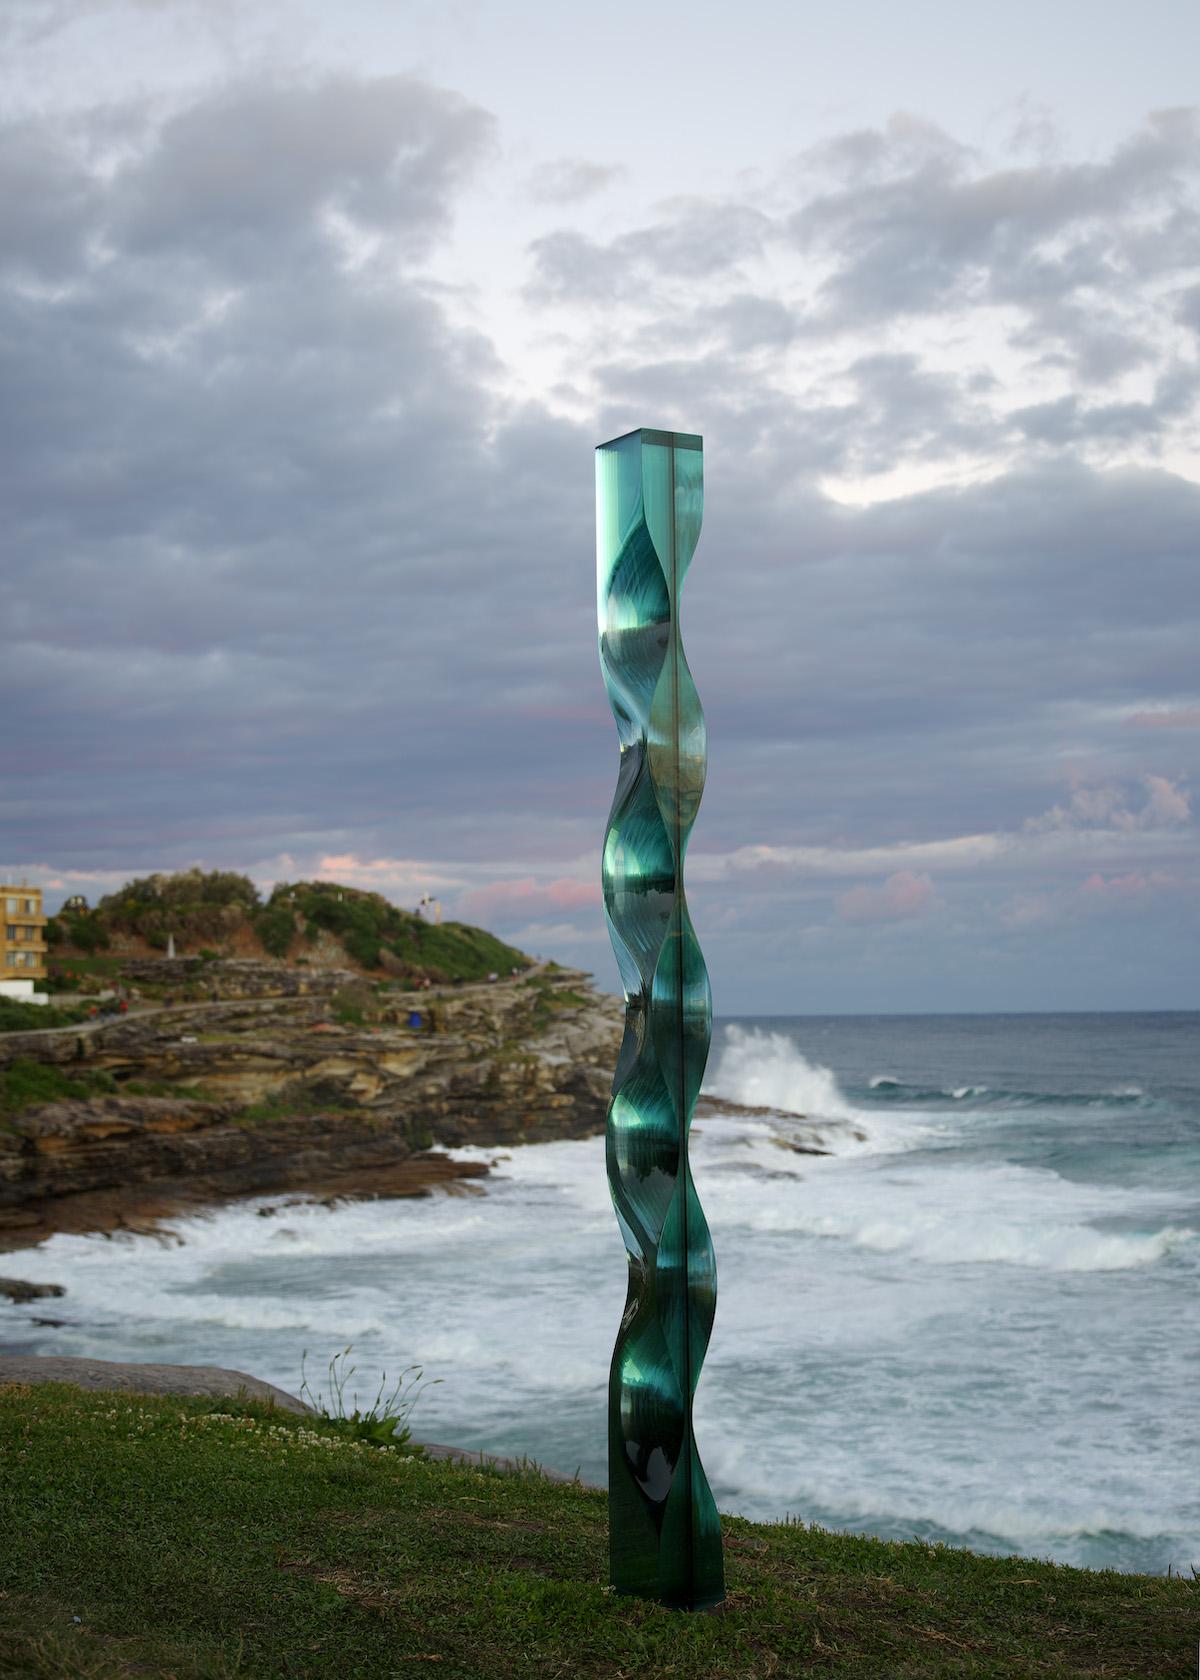 M.151201 by Toshio Iezumi -  Abstract glass sculpture, 6 ft. 10